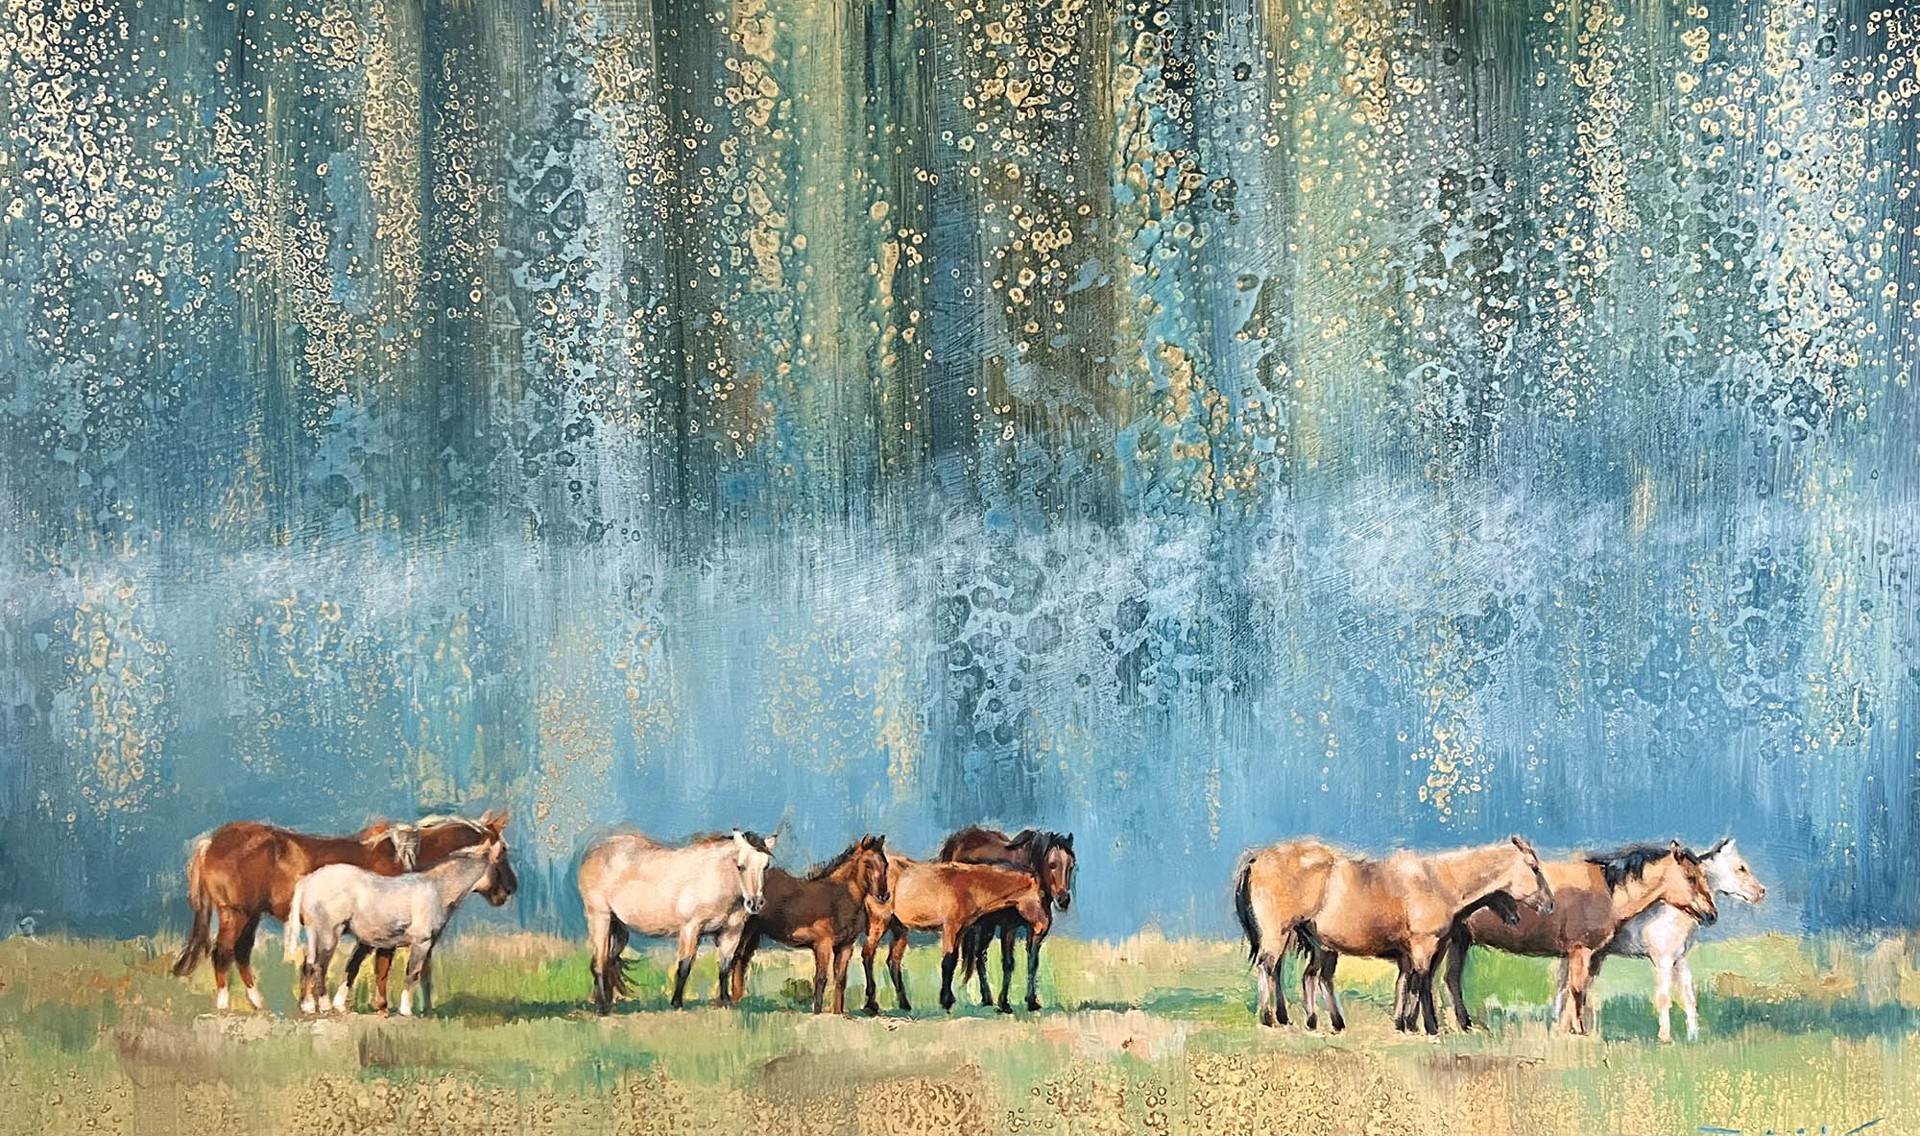 Original Mixed Media Painting By Nealy Riley Featuring Horses On An Abstracted Landscape